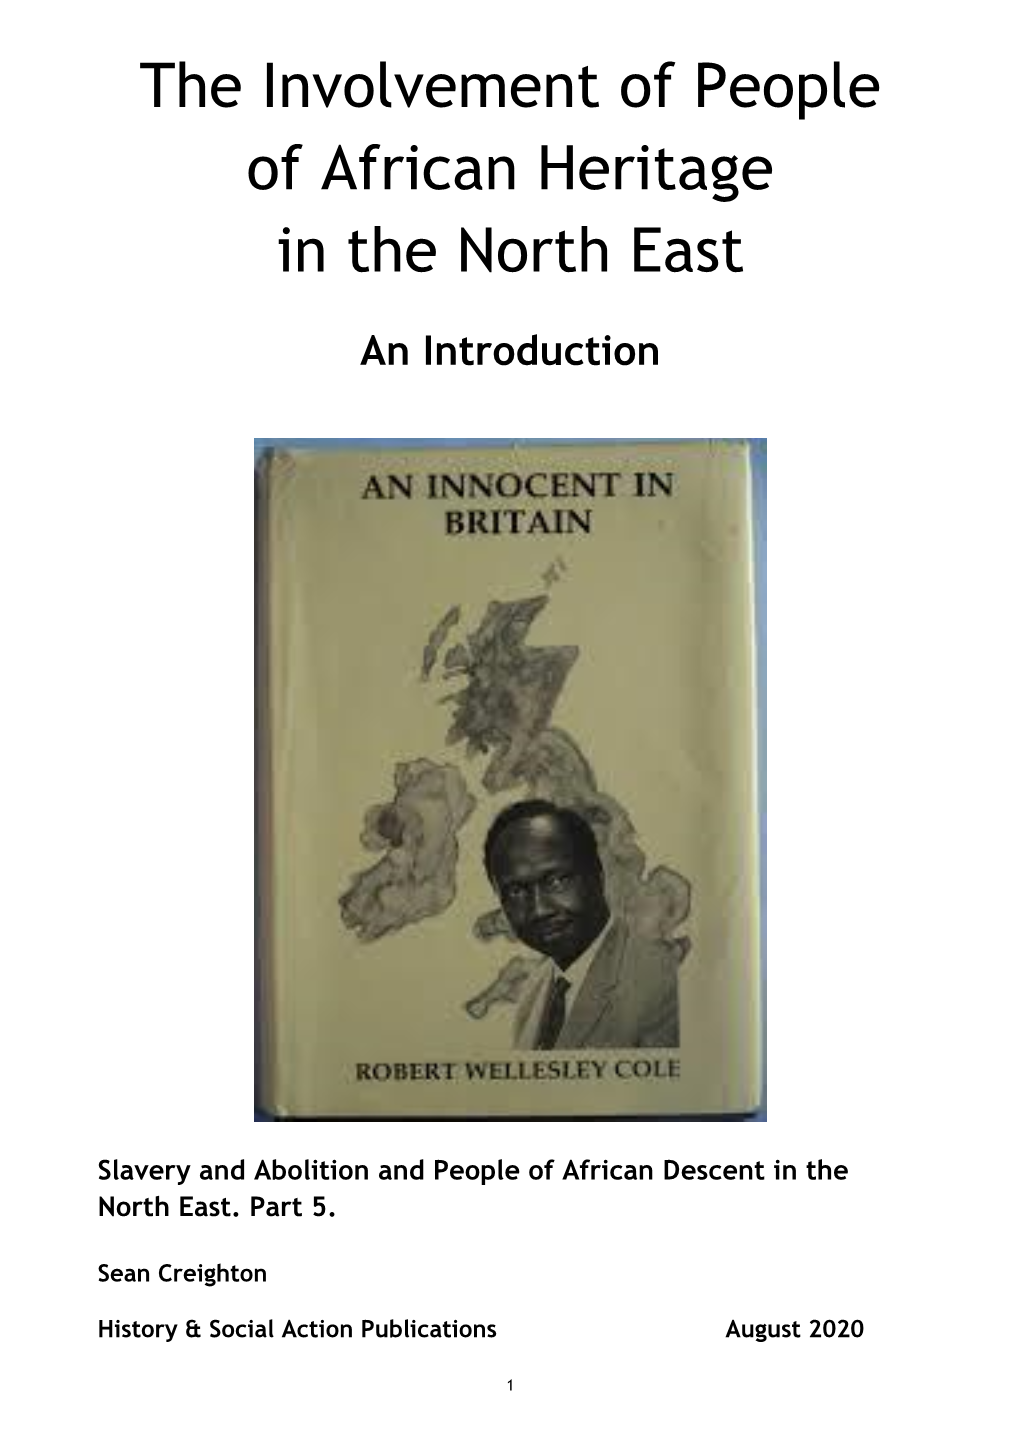 The Involvement of People of African Heritage in the North East